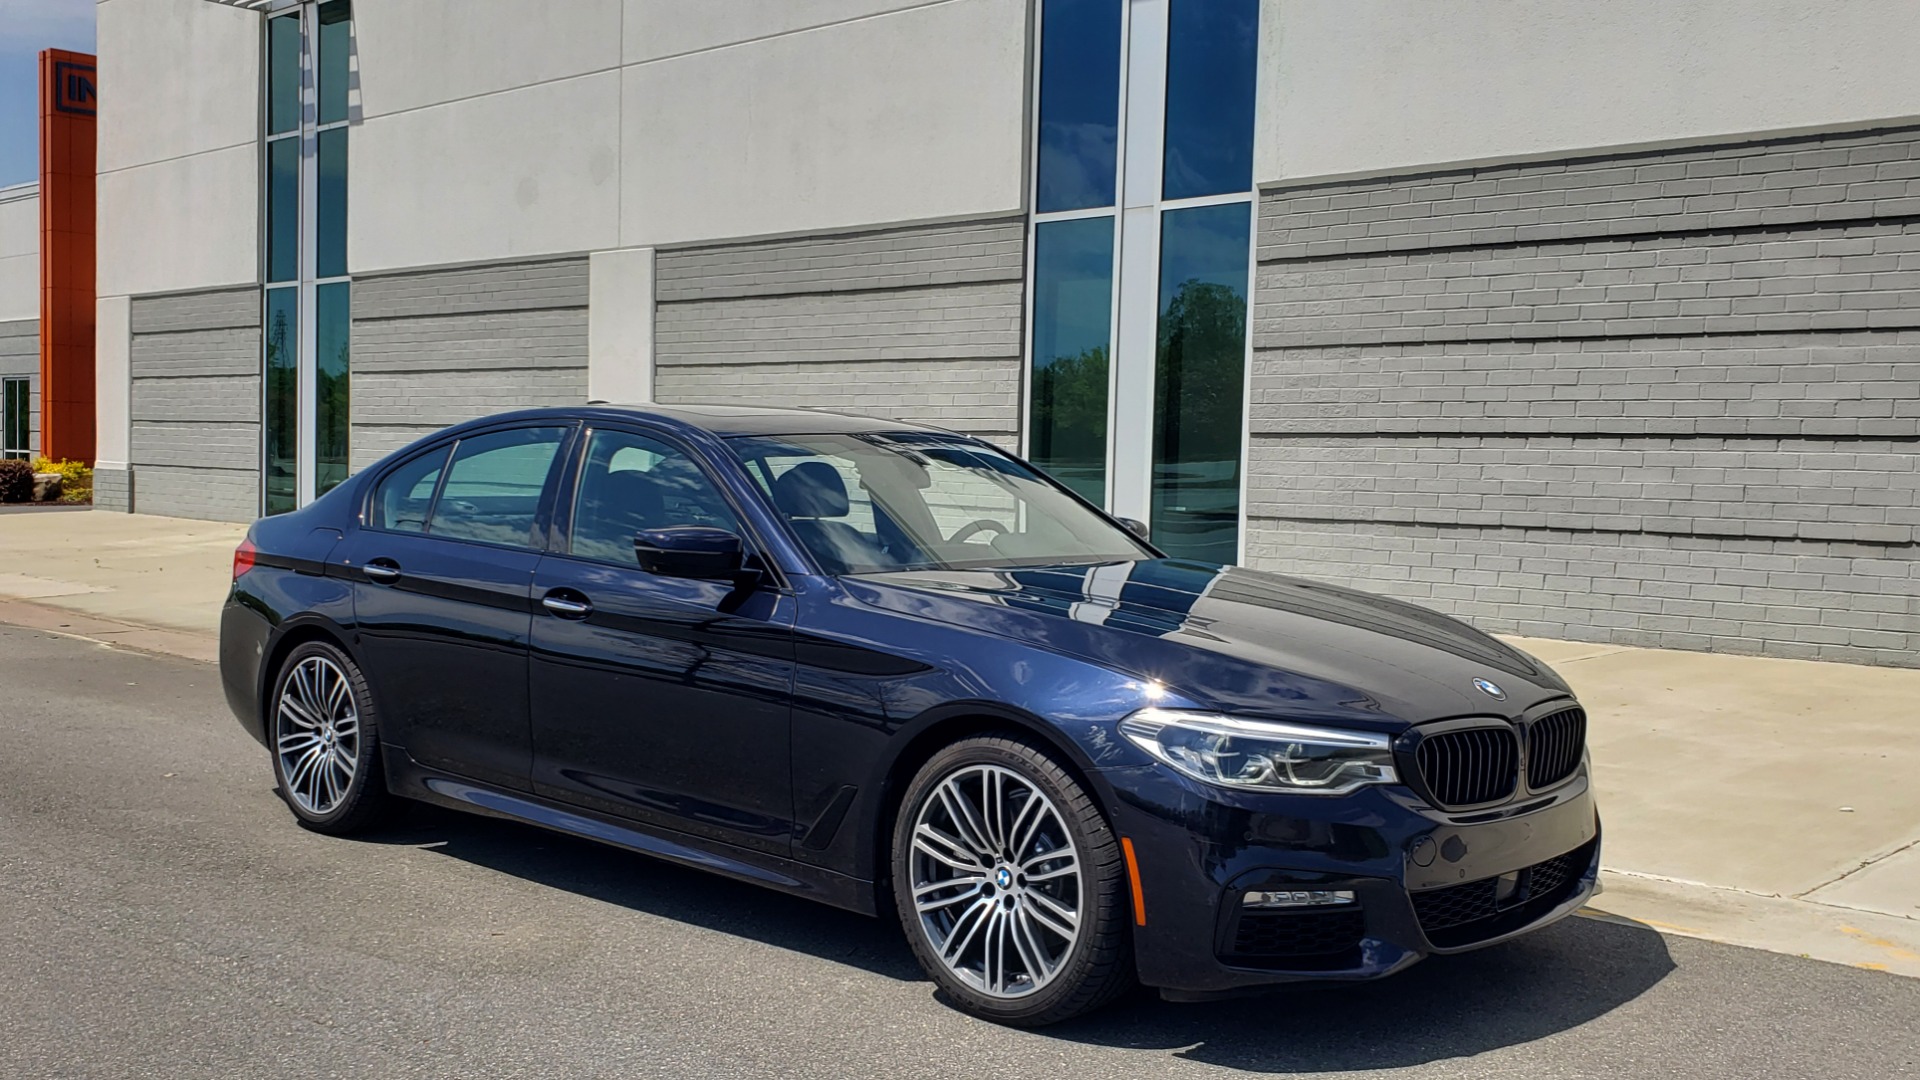 Used 2017 BMW 5 SERIES 540I XDRIVE M-SPORT / PREMIUM / DRVR ASST PLUS / CLD WTHR / LUXURY for sale Sold at Formula Imports in Charlotte NC 28227 3